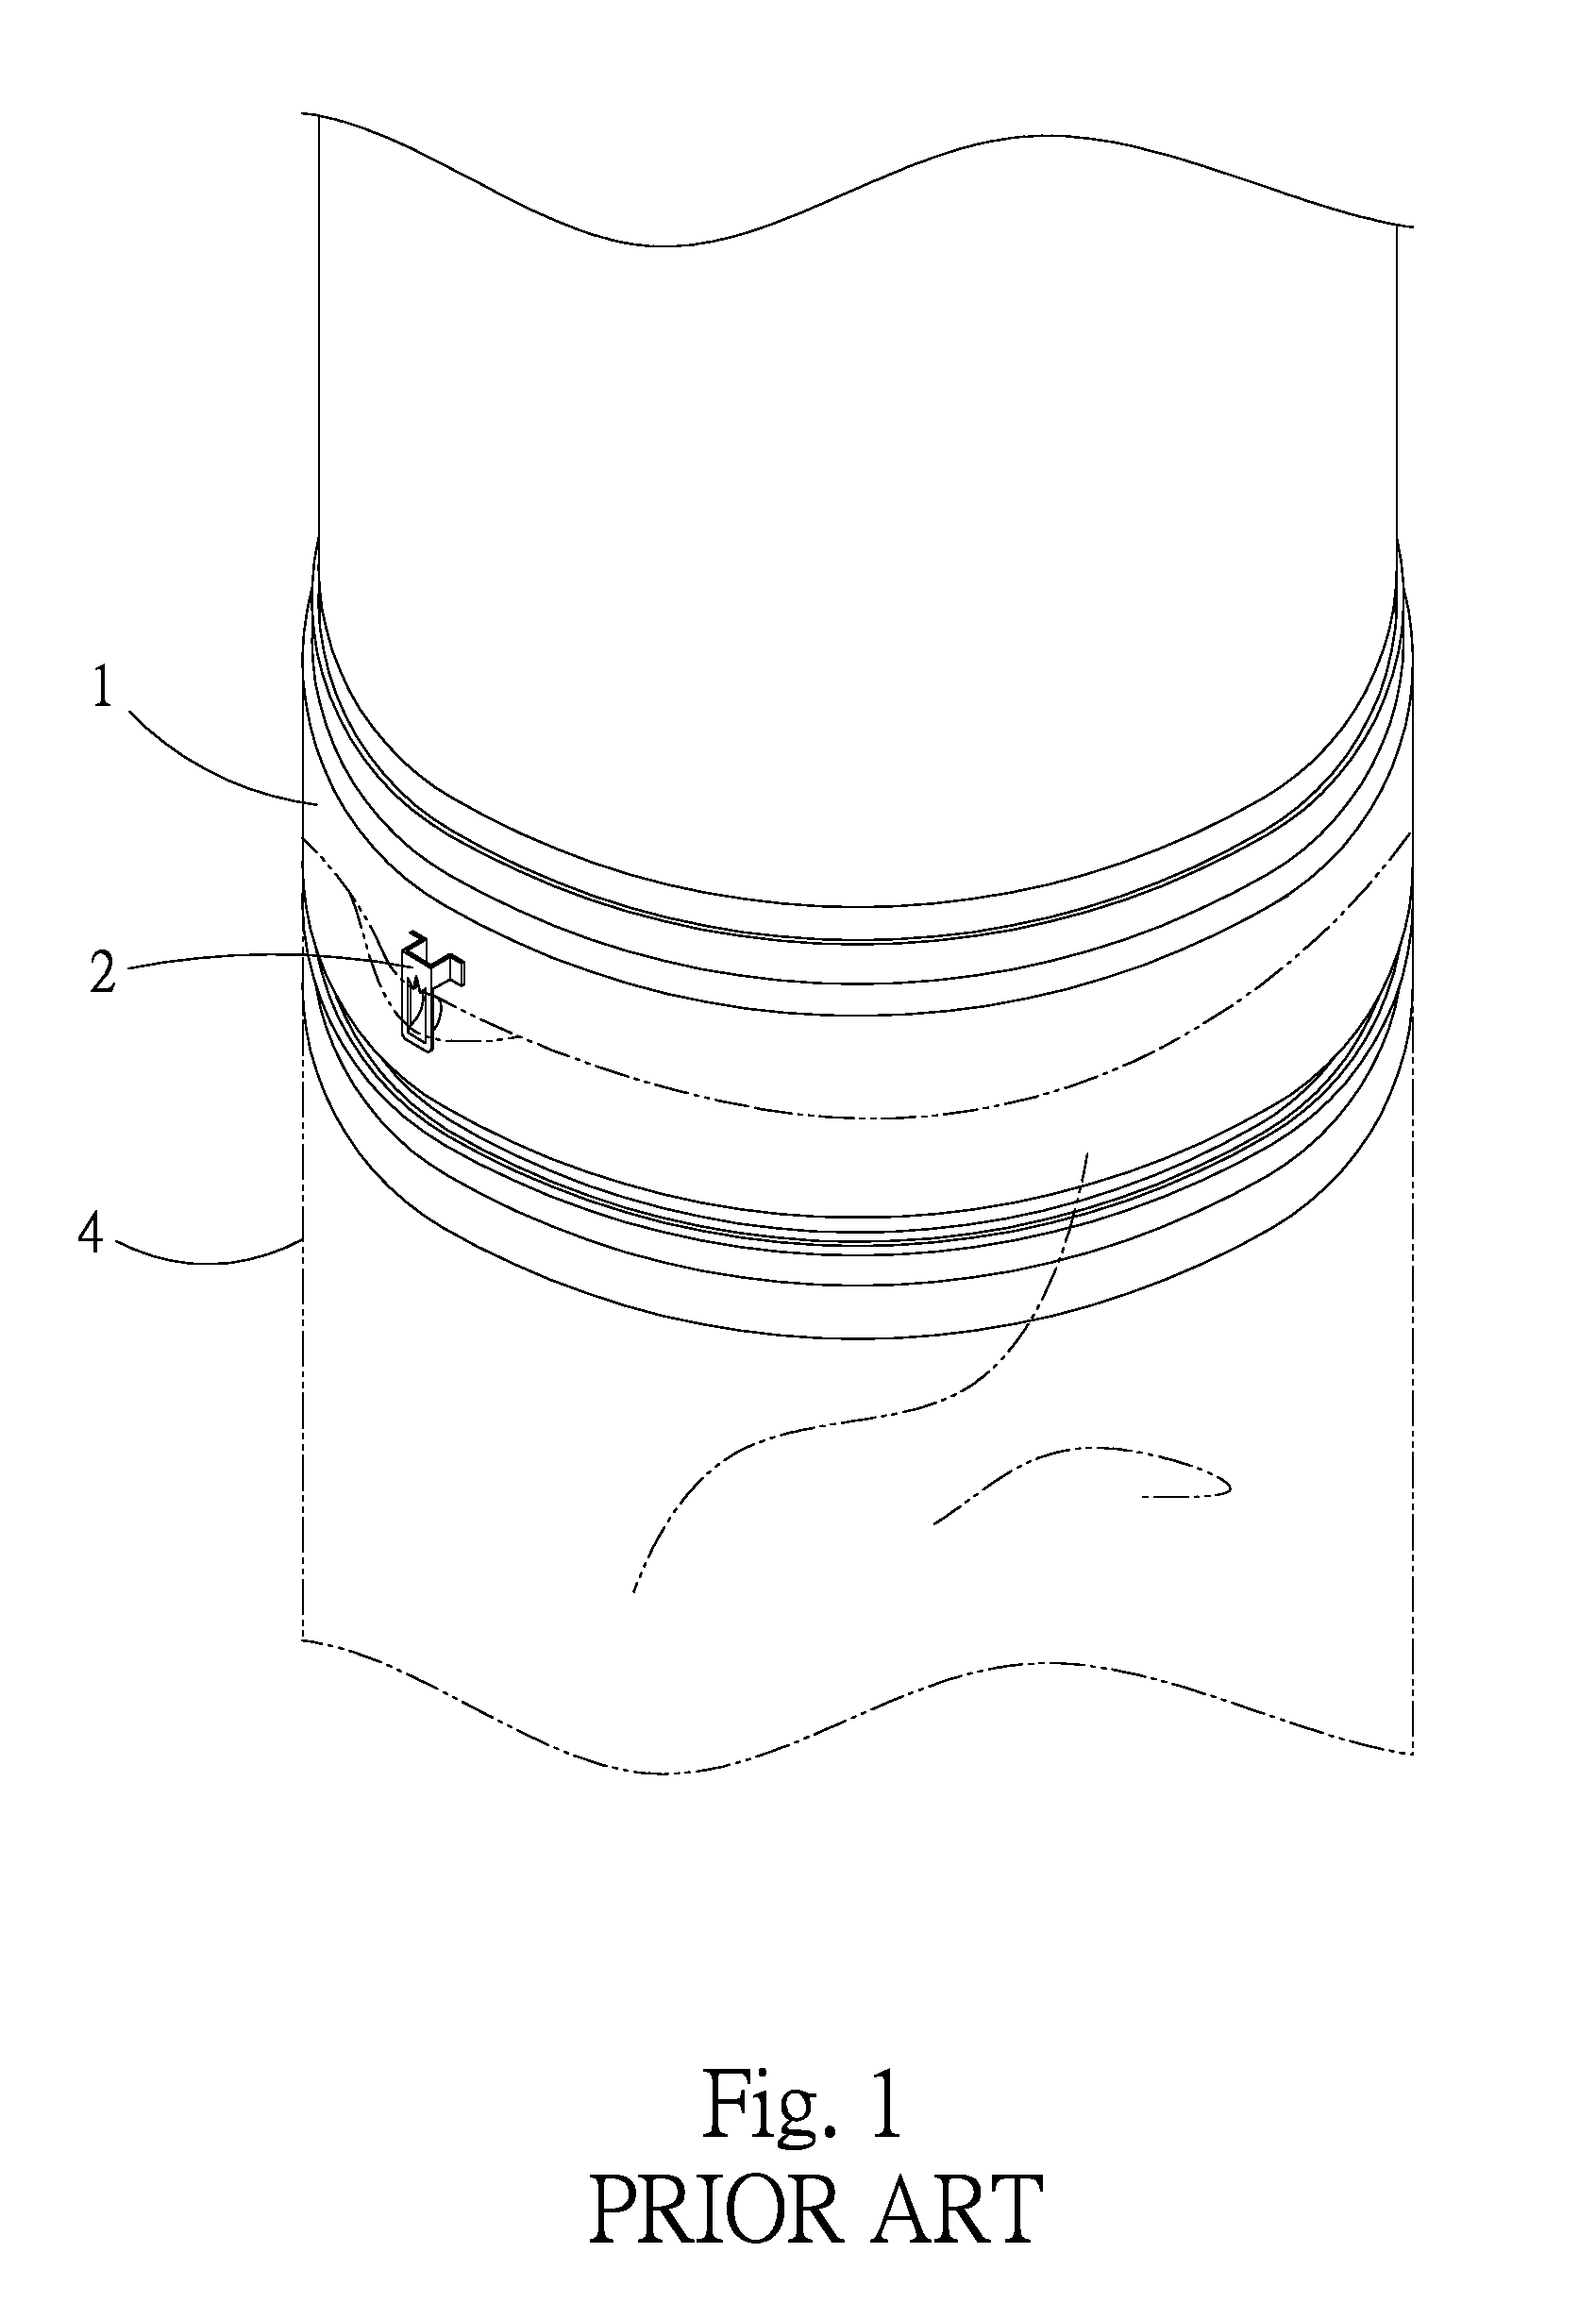 Dust bag structure easily fittable and connectable to a dust collector